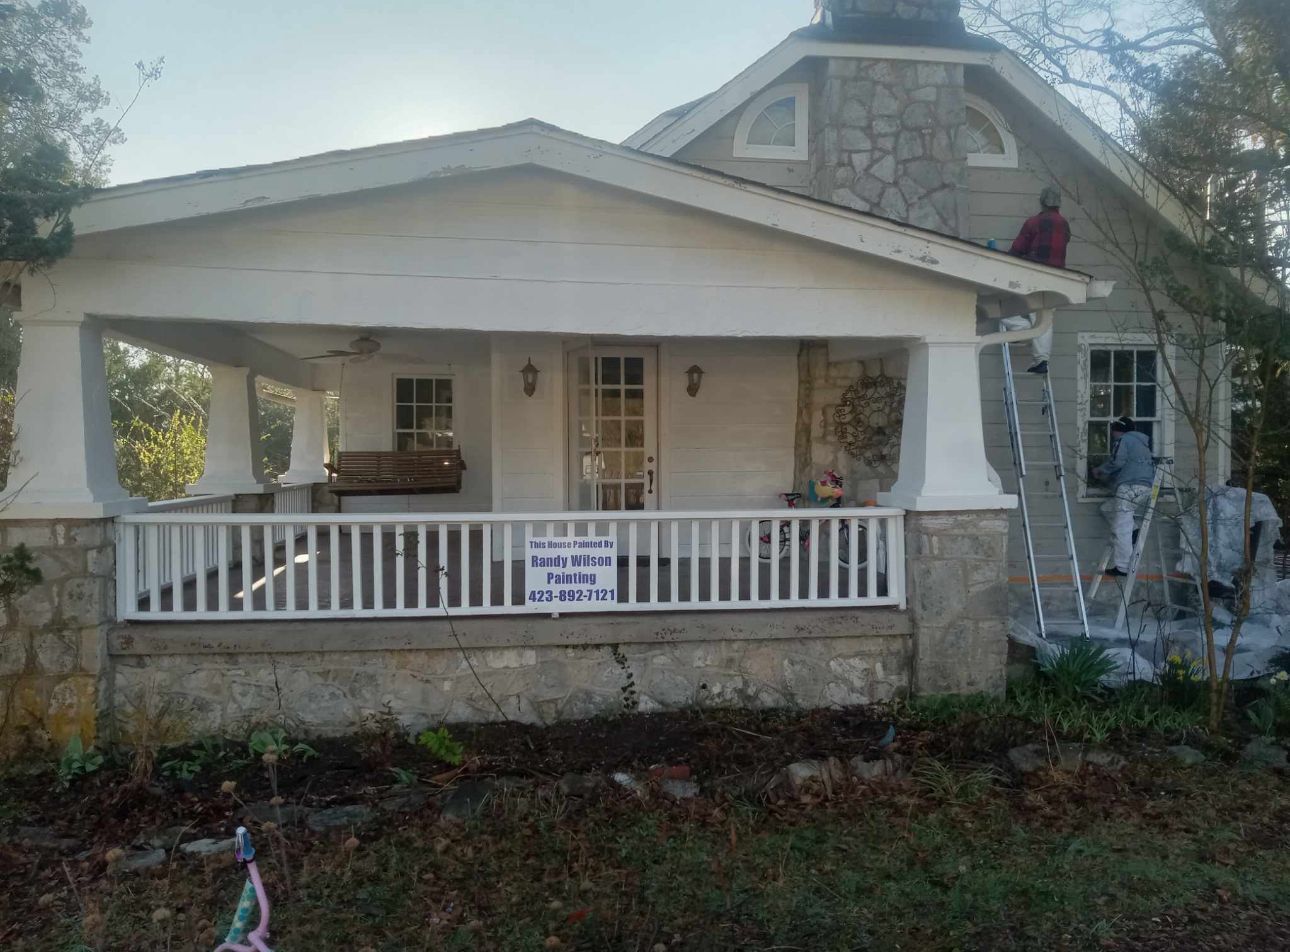 A man is painting the side of a house with a white porch